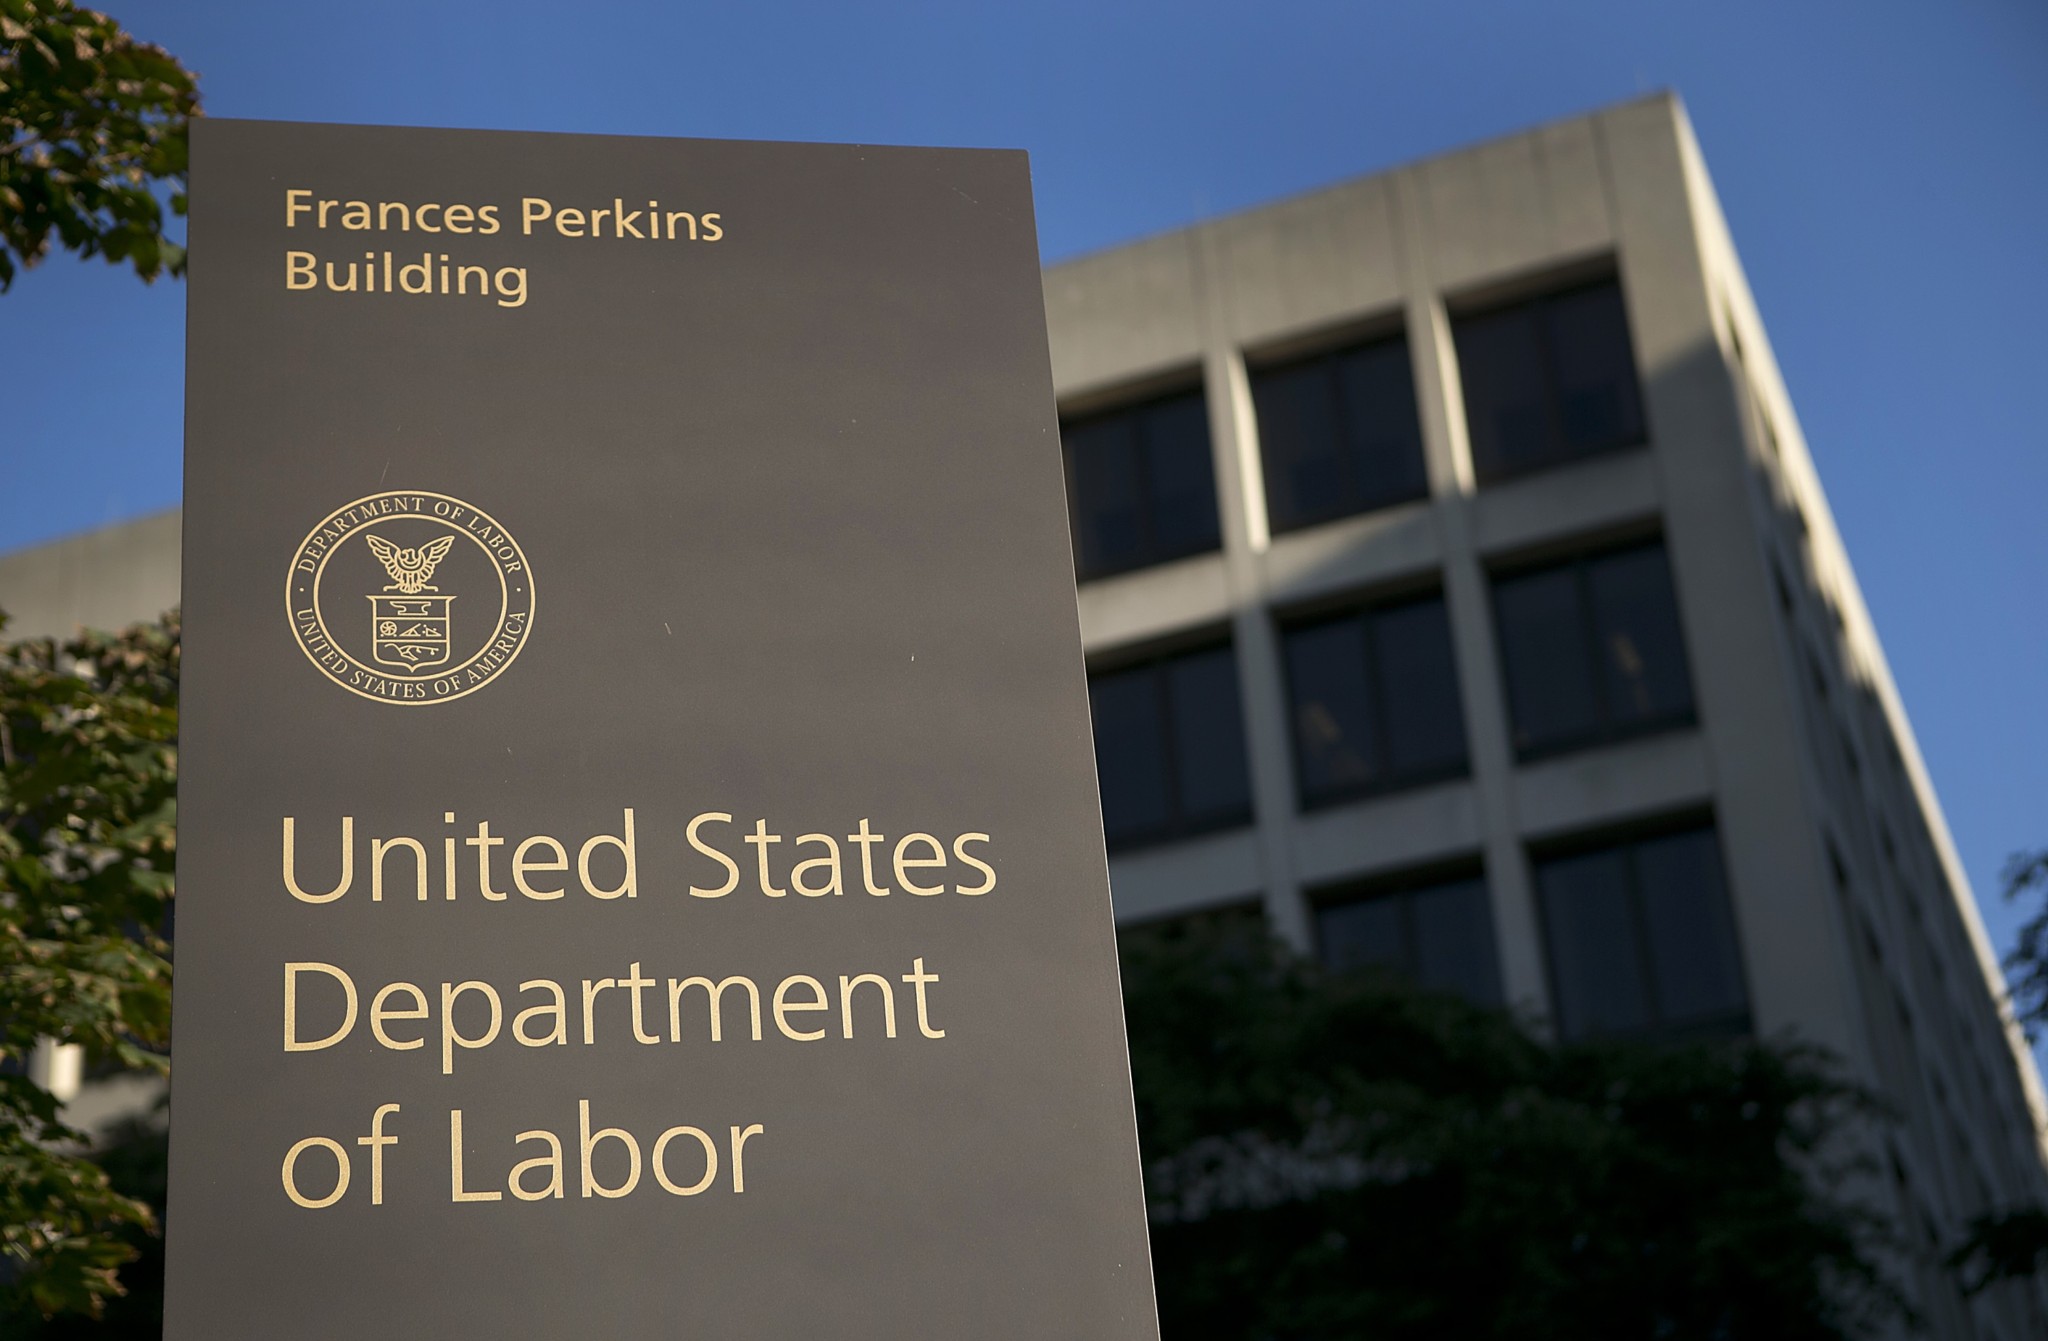 Photo of the Frances Perkins Building - United States Department of Labor